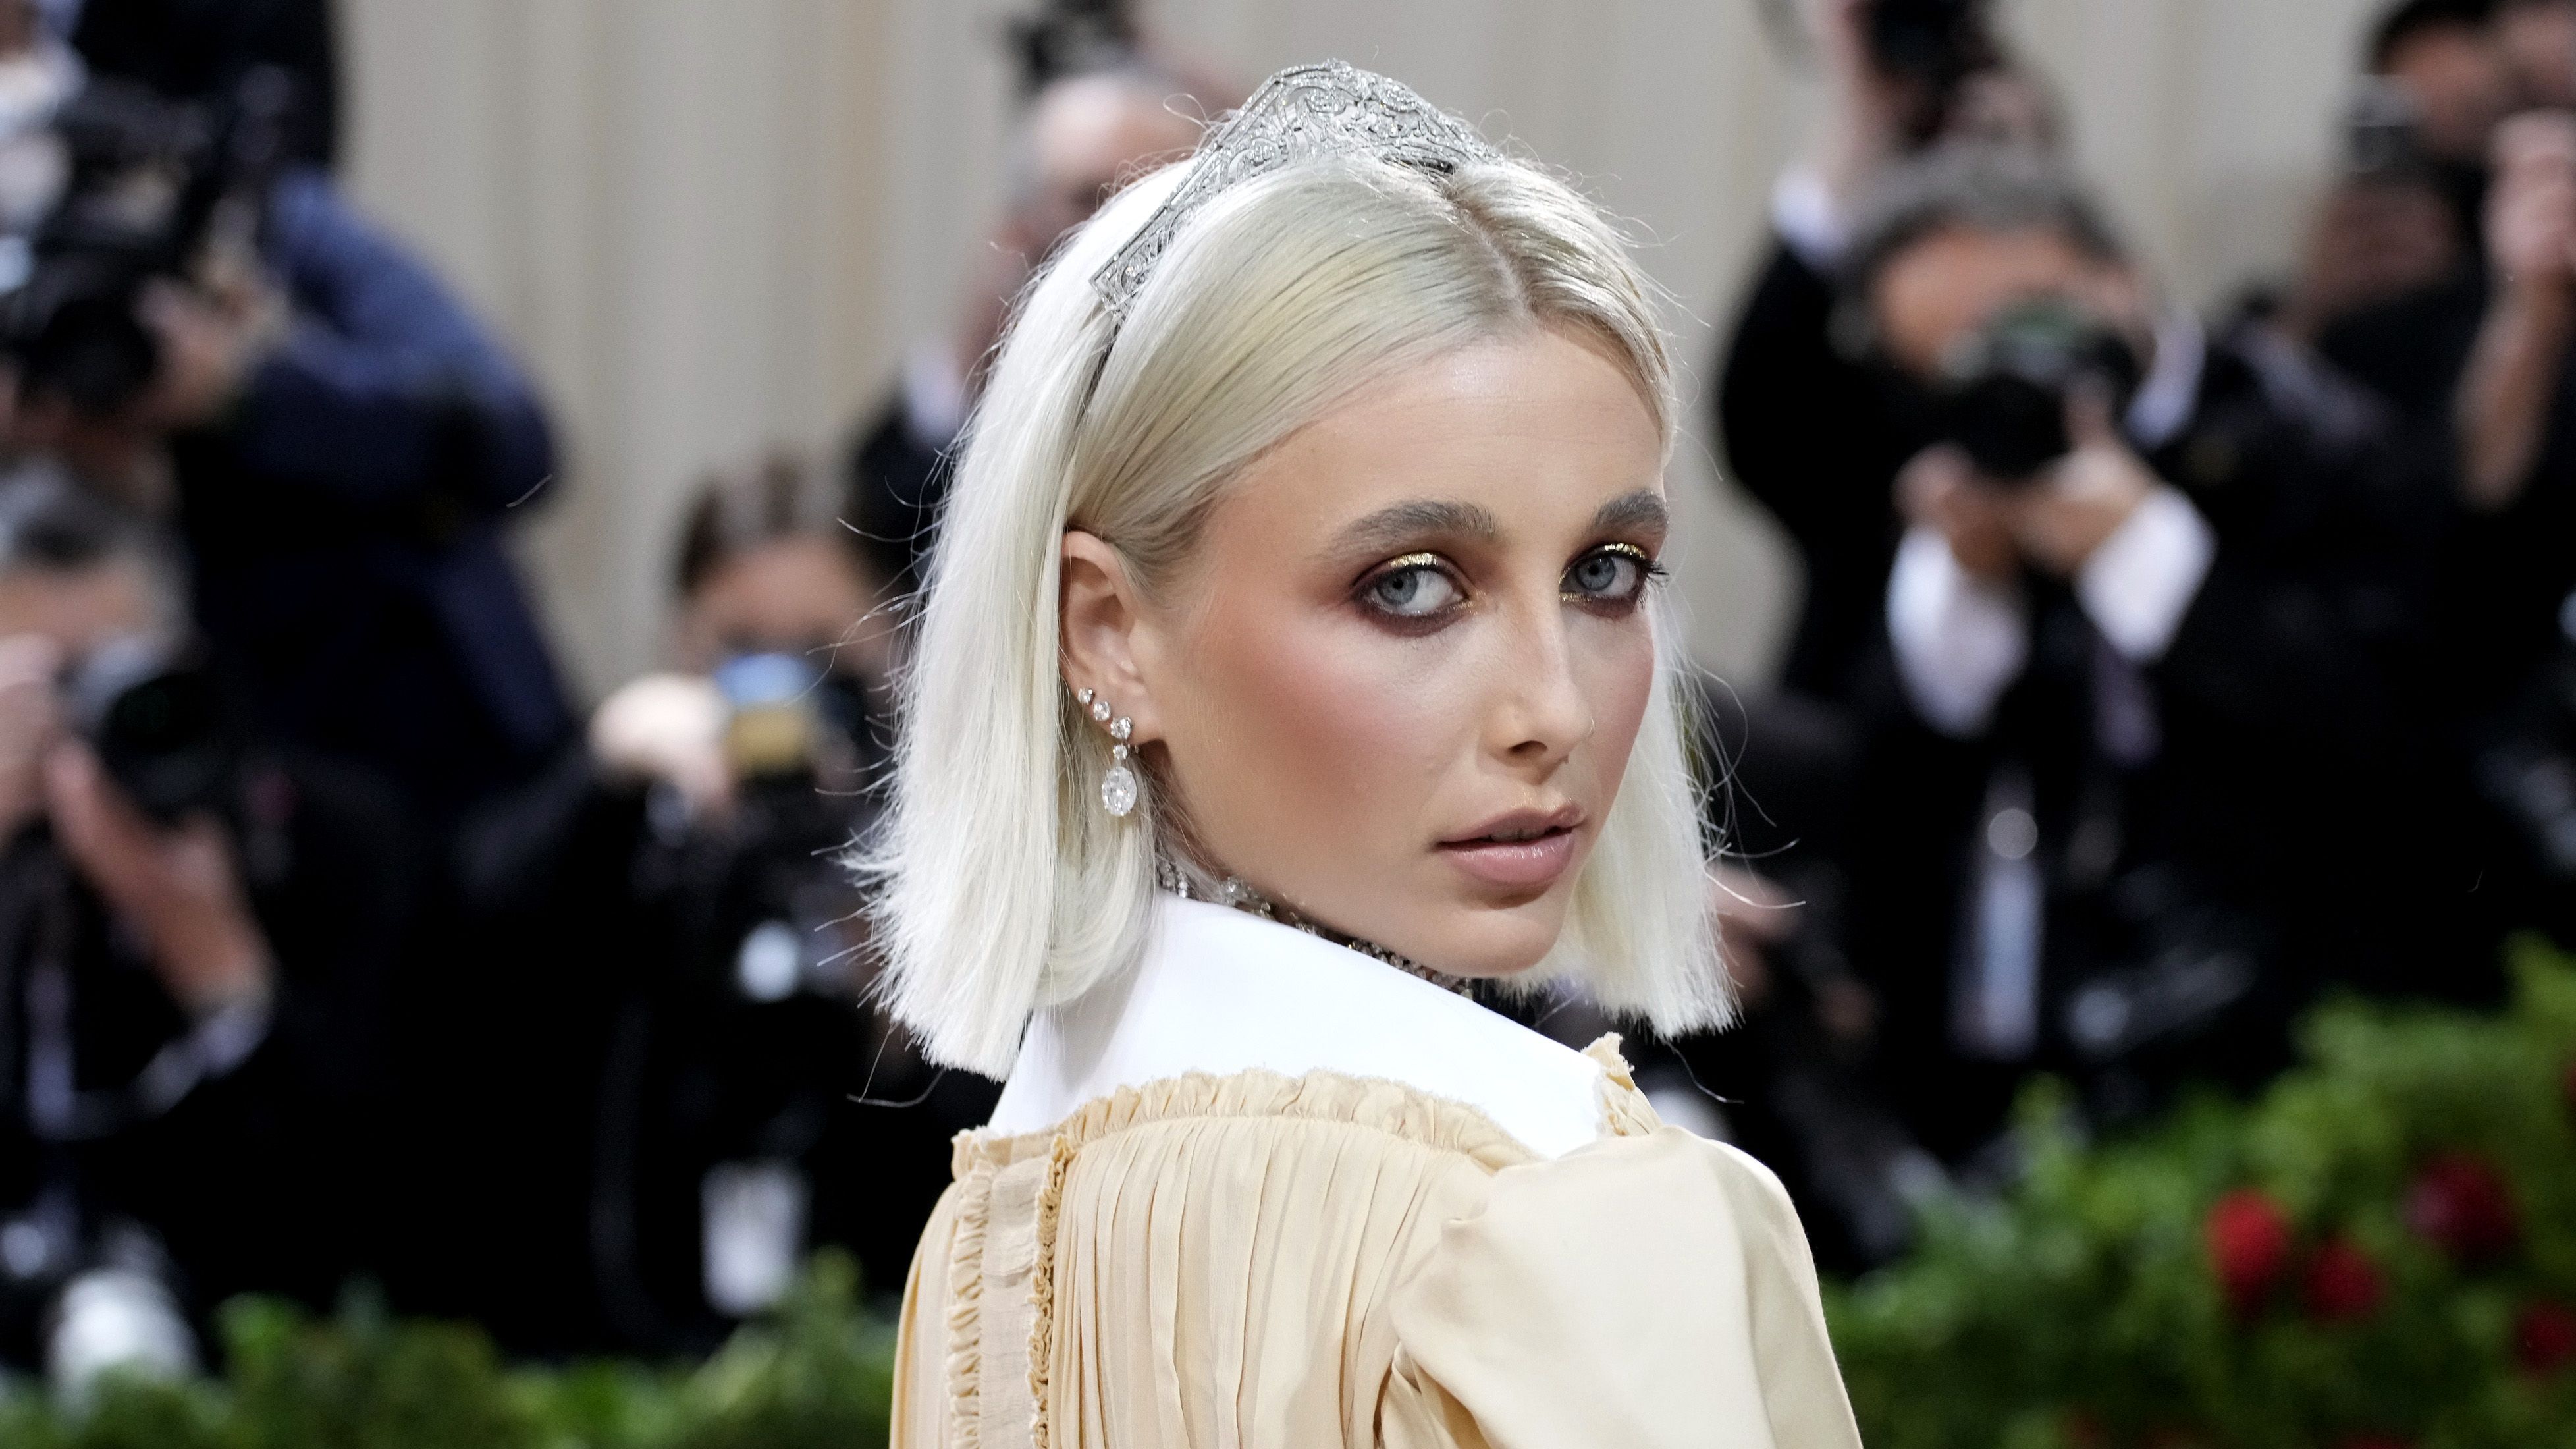 Emma Chamberlain's Extremely Smokey Eyeliner at the Met Gala Is